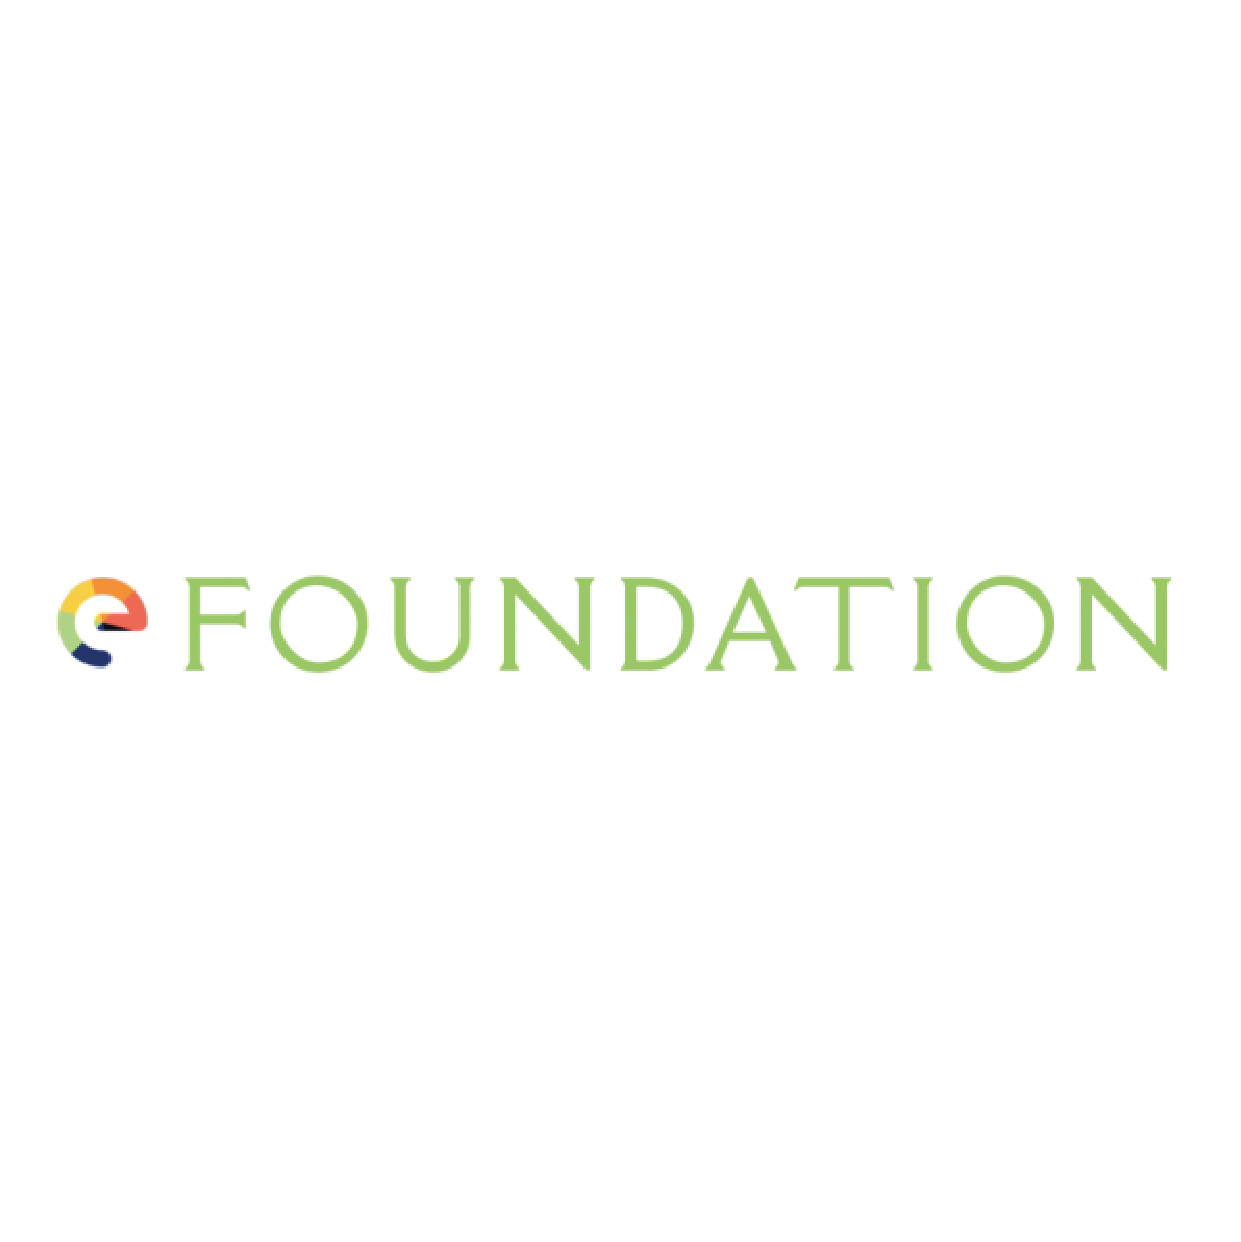 eFoundation announcing